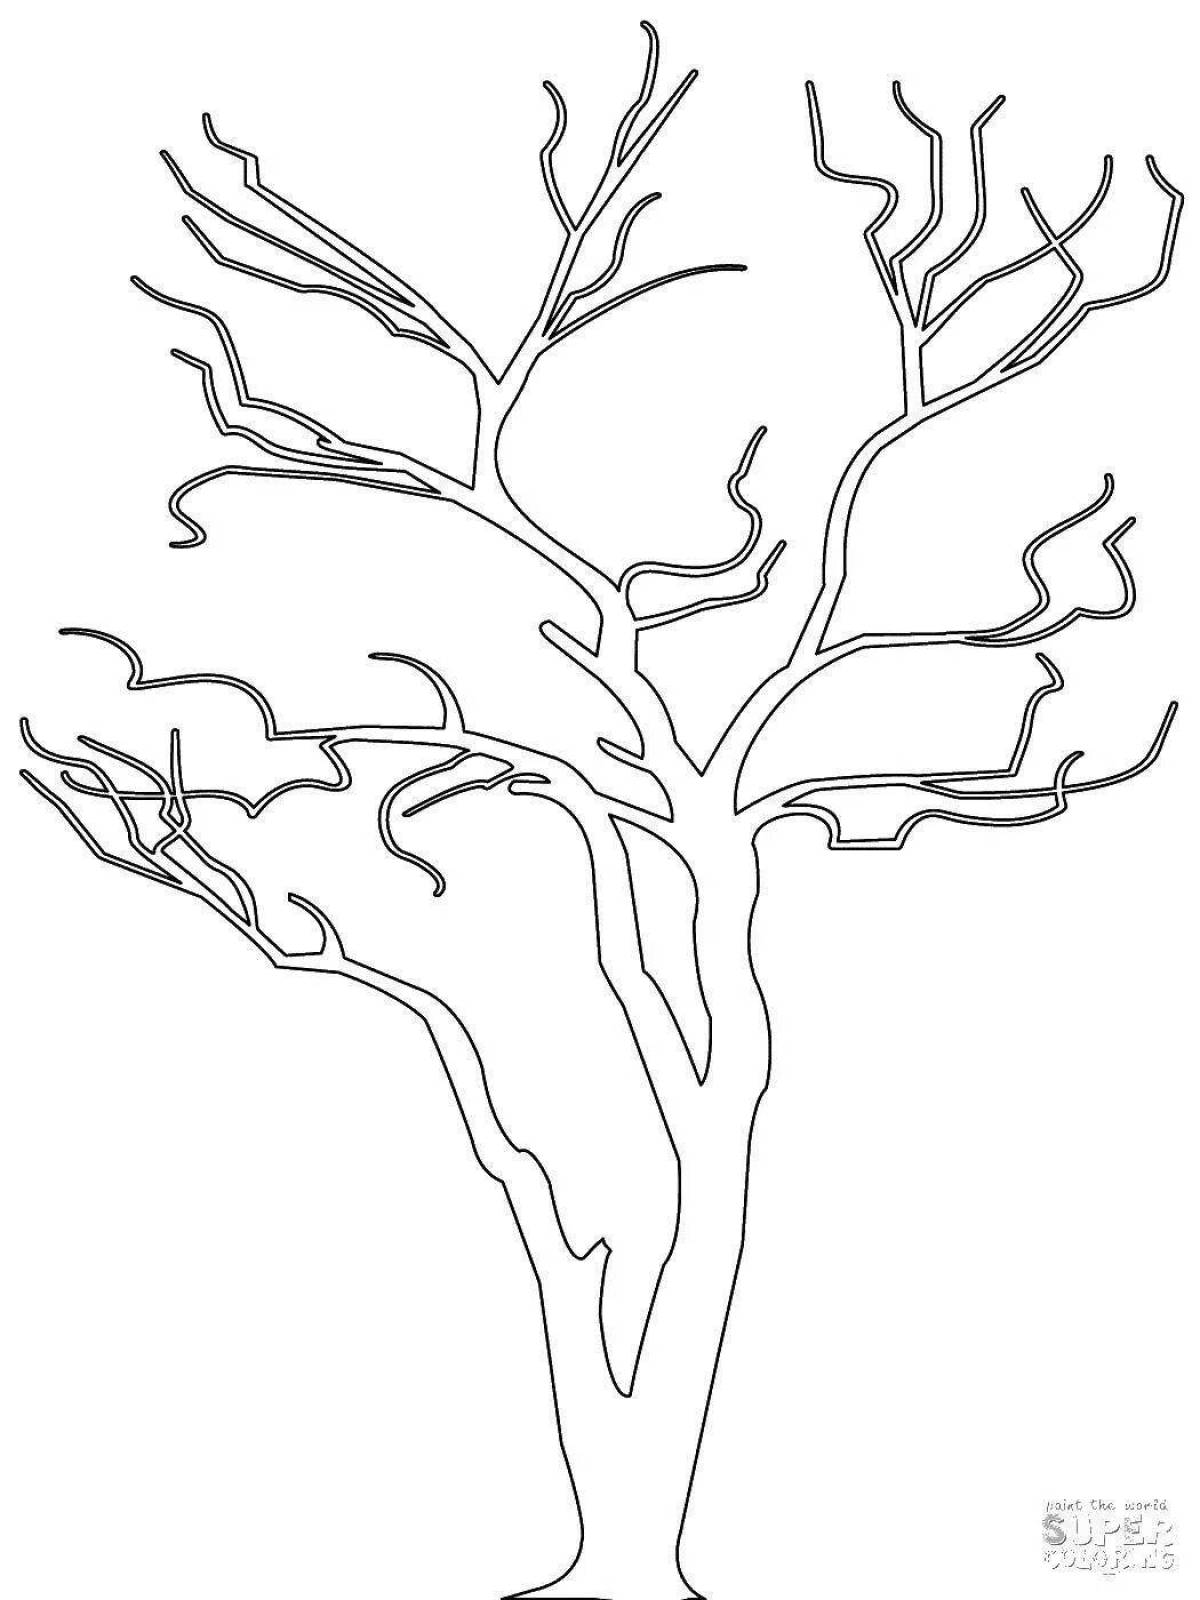 Awesome branching tree coloring page